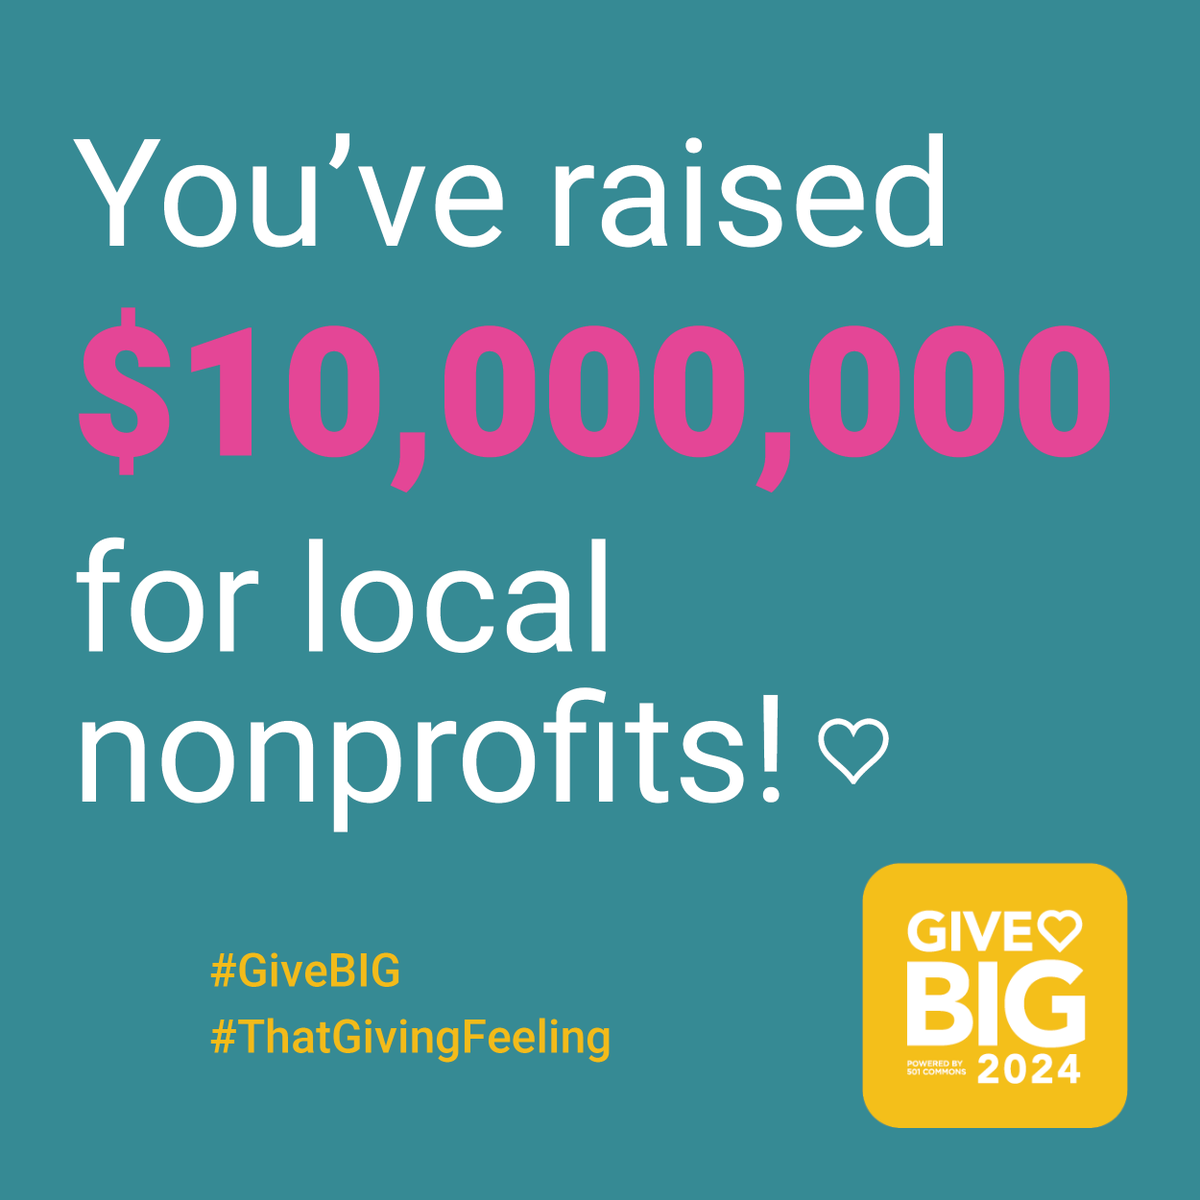 With the second day of #GiveBIG winding down, we’ve just surpassed $10 million raised for 1,400+ WA nonprofits!

You still have the next few weeks to help organizations reach their goals. So, if you haven’t gotten #ThatGivingFeeling yet, do so right away!

wagives.org